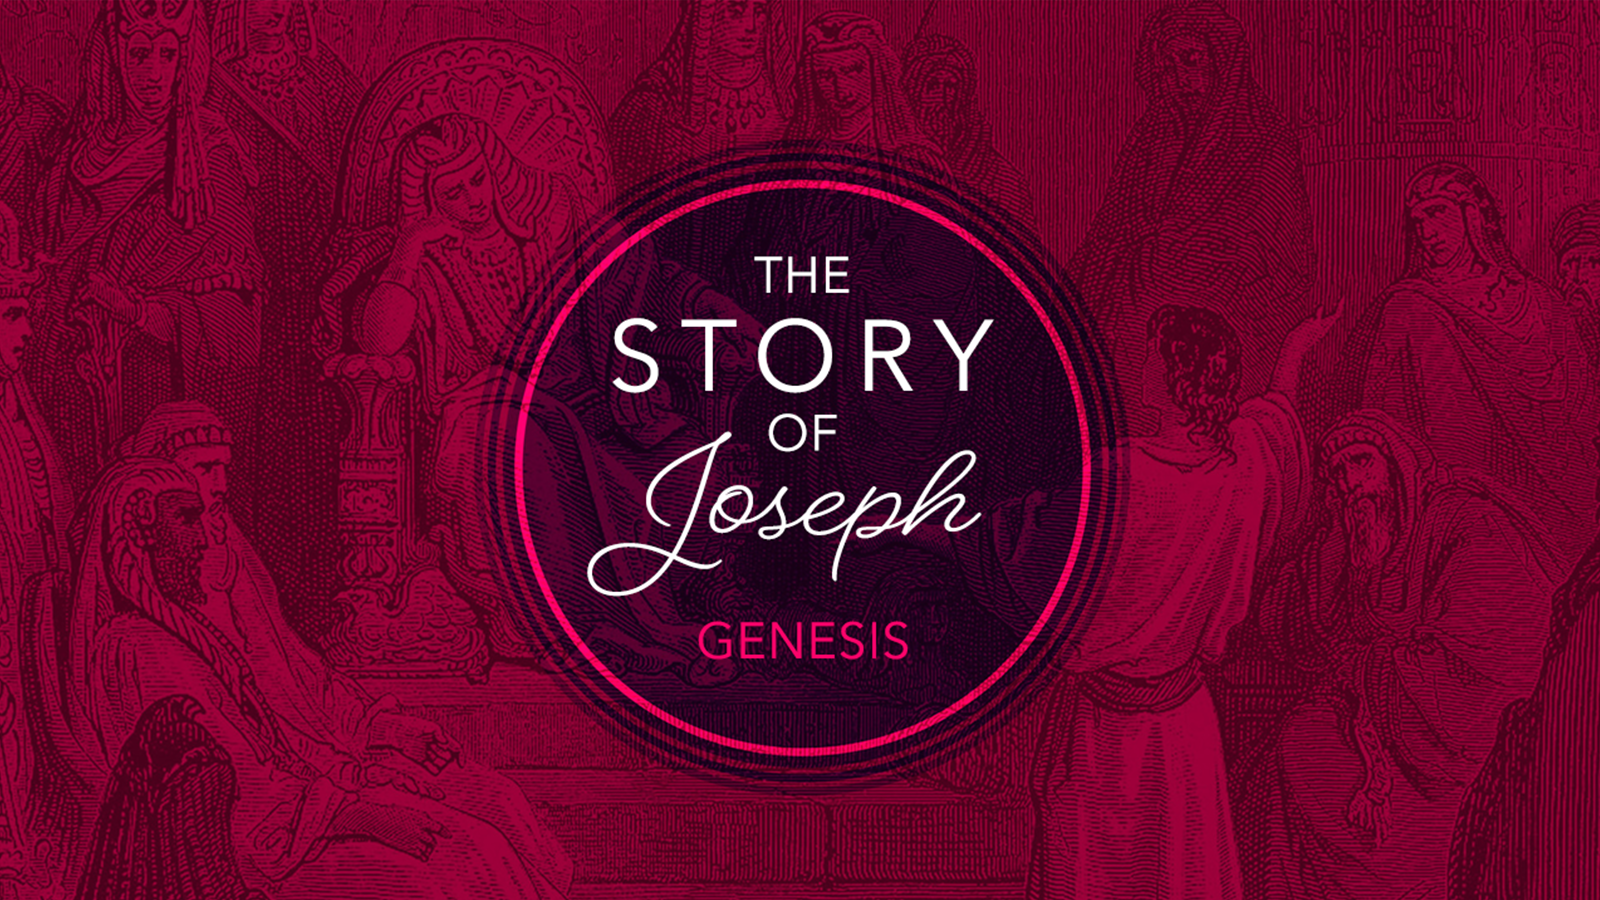 The Lord was with Joseph Image